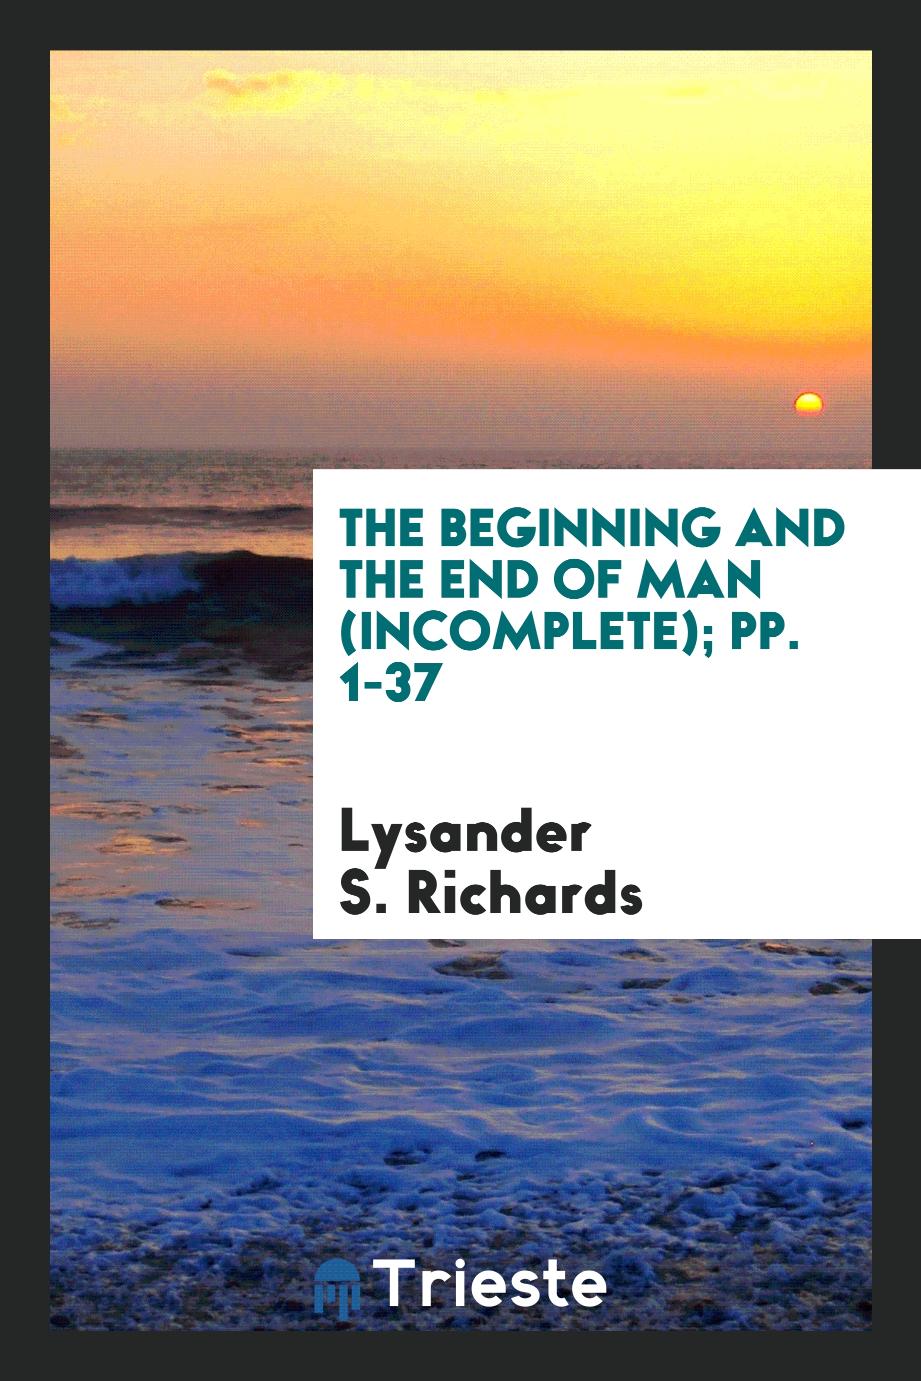 The Beginning and the End of Man (Incomplete); pp. 1-37